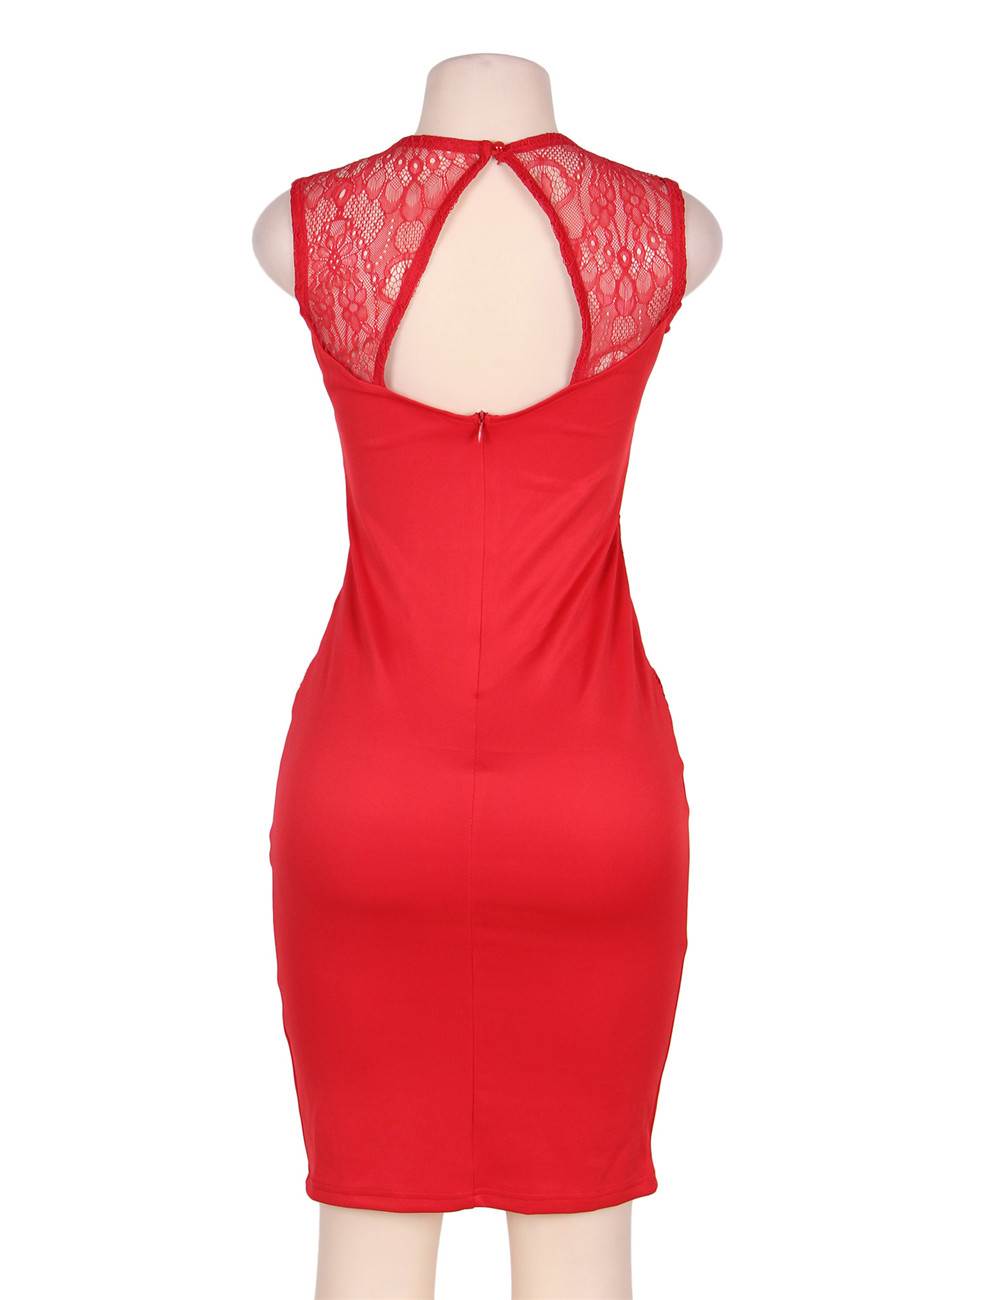 Red Deluxe Decals Fashion Dress With Backless Top Lace Bodycon